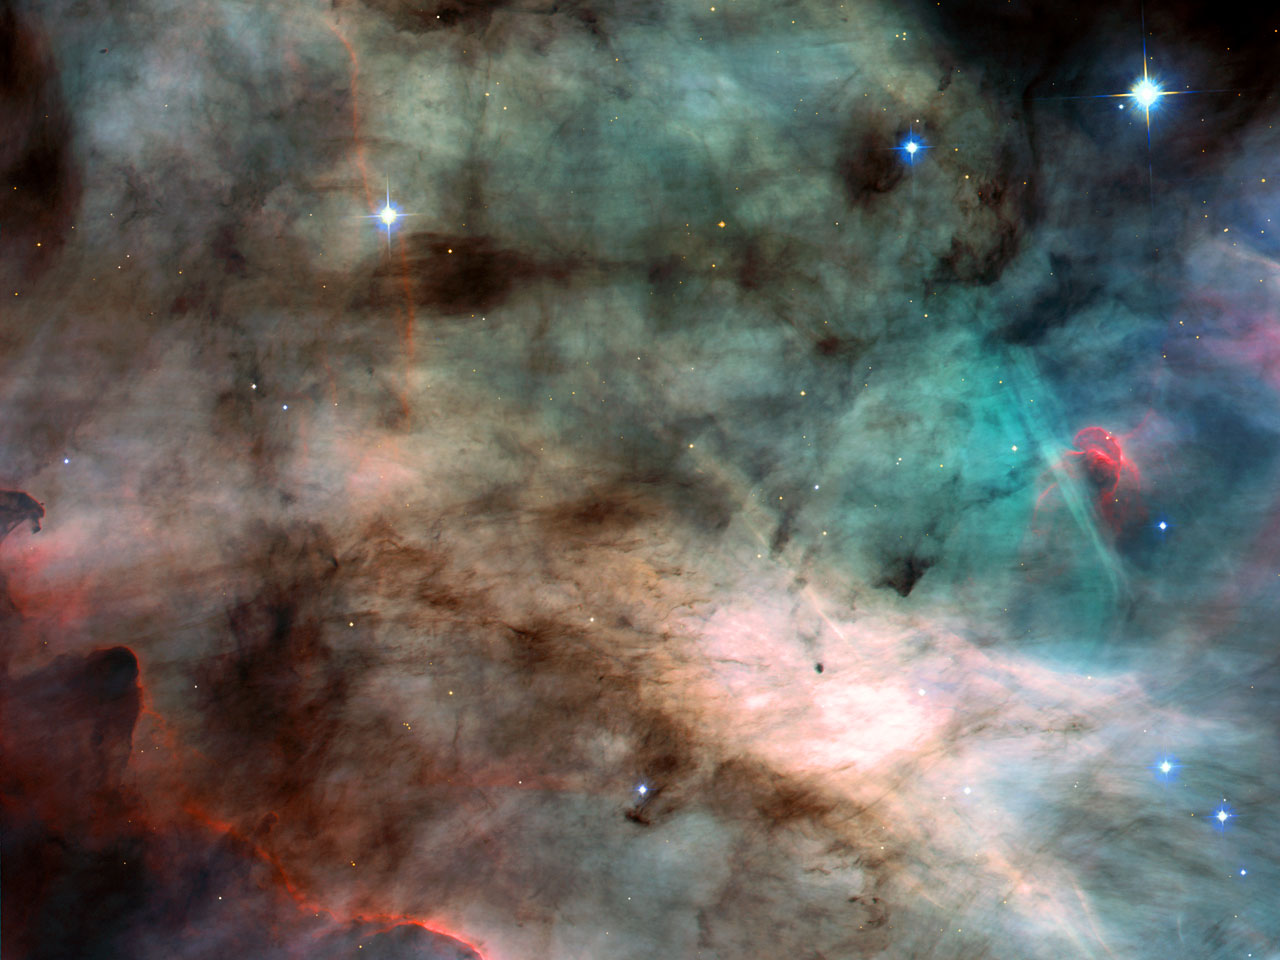 A watercolour fantasyland? No. It's actually a photograph of the centre of the Swan Nebula, or M17, a hotbed of newly born stars wrapped in colourful blankets of glowing gas and cradled in an enormous cold, dark hydrogen cloud. This stunning picture was taken by the newly installed Advanced Camera for Surveys (ACS) aboard the NASA/ESA Hubble Space Telescope. The region of the nebula shown in this picture is about 3500 times wider than our Solar System. The area also represents about 60 percent of the total view captured by ACS. The nebula resides 5500 light-years away in the constellation Sagittarius. Like its famous cousin in Orion, the Swan Nebula is illuminated by ultraviolet radiation from young, massive stars - each about six times hotter and 30 times more massive than the Sun - located just beyond the upper right corner of the image. The powerful radiation from these stars evaporates and erodes the dense cloud of cold gas within which the stars formed. The blistered walls of the hollow cloud shine primarily in the blue, green, and red light emitted by excited atoms of hydrogen, nitrogen, oxygen, and sulphur. Particularly striking is the rose-like feature, seen to the right of centre, which glows in the red light emitted by hydrogen and sulphur. As the infant stars evaporate the surrounding cloud, they expose dense pockets of gas that may contain developing stars. Because these dense pockets are more resistant to the withering radiation than the surrounding cloud, they appear as sculptures in the walls of the cloud or as isolated islands in a sea of glowing gas. One isolated pocket is seen at the centre of the brightest region of the nebula and is about 10 times larger than our Solar System. Other dense pockets of gas have formed the remarkable feature jutting inward from the left edge of the image, which resembles the famous Horsehead Nebula in Orion. The ACS made this observation on 1 and 2 April 2002. The colour image is constructed from four separate images